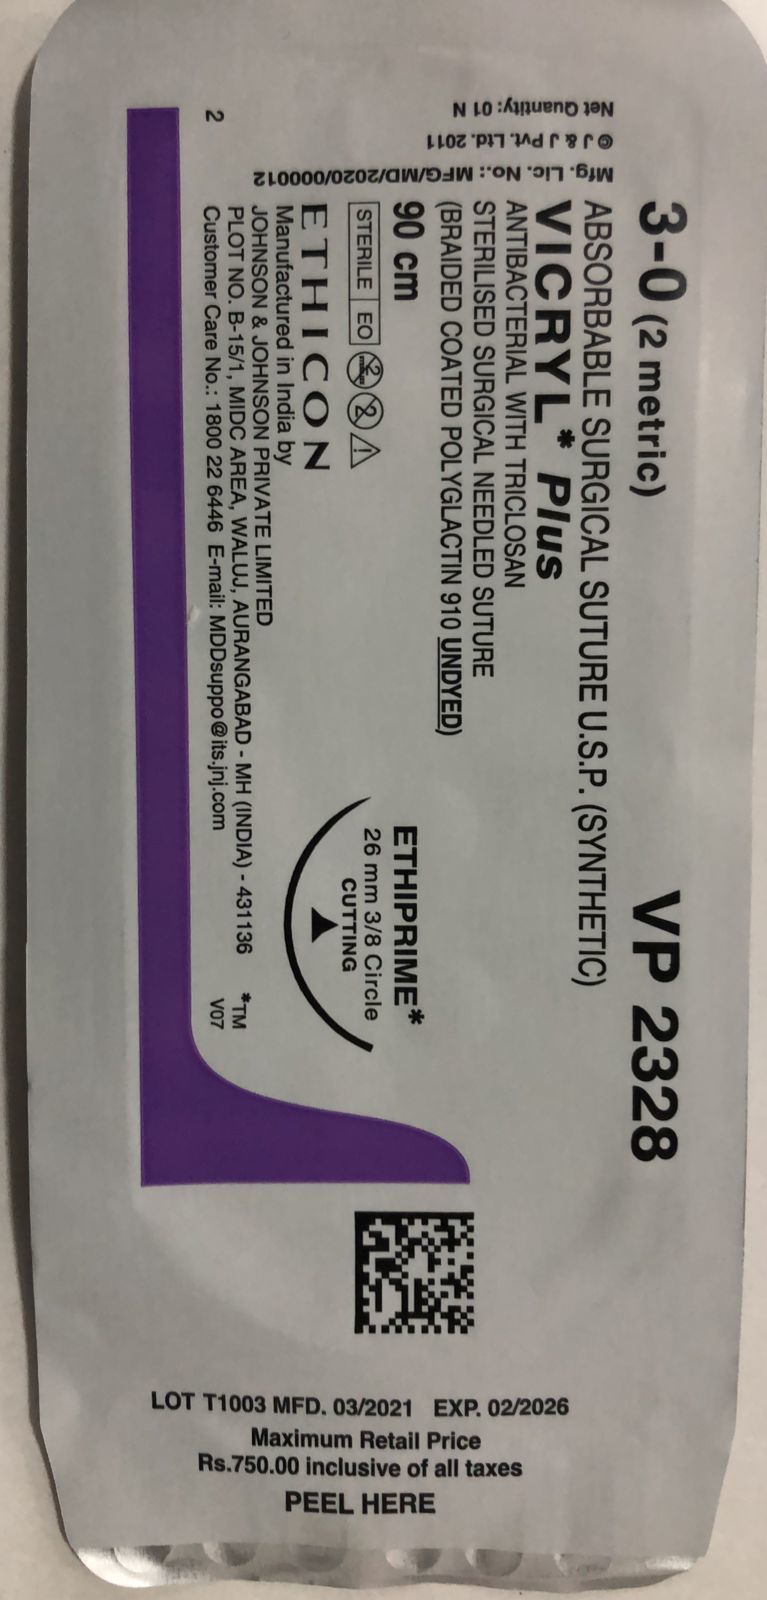 Ethicon Synthetic Absorbable Coated Vicryl Plus Antibacterial Sutures(VP2328)